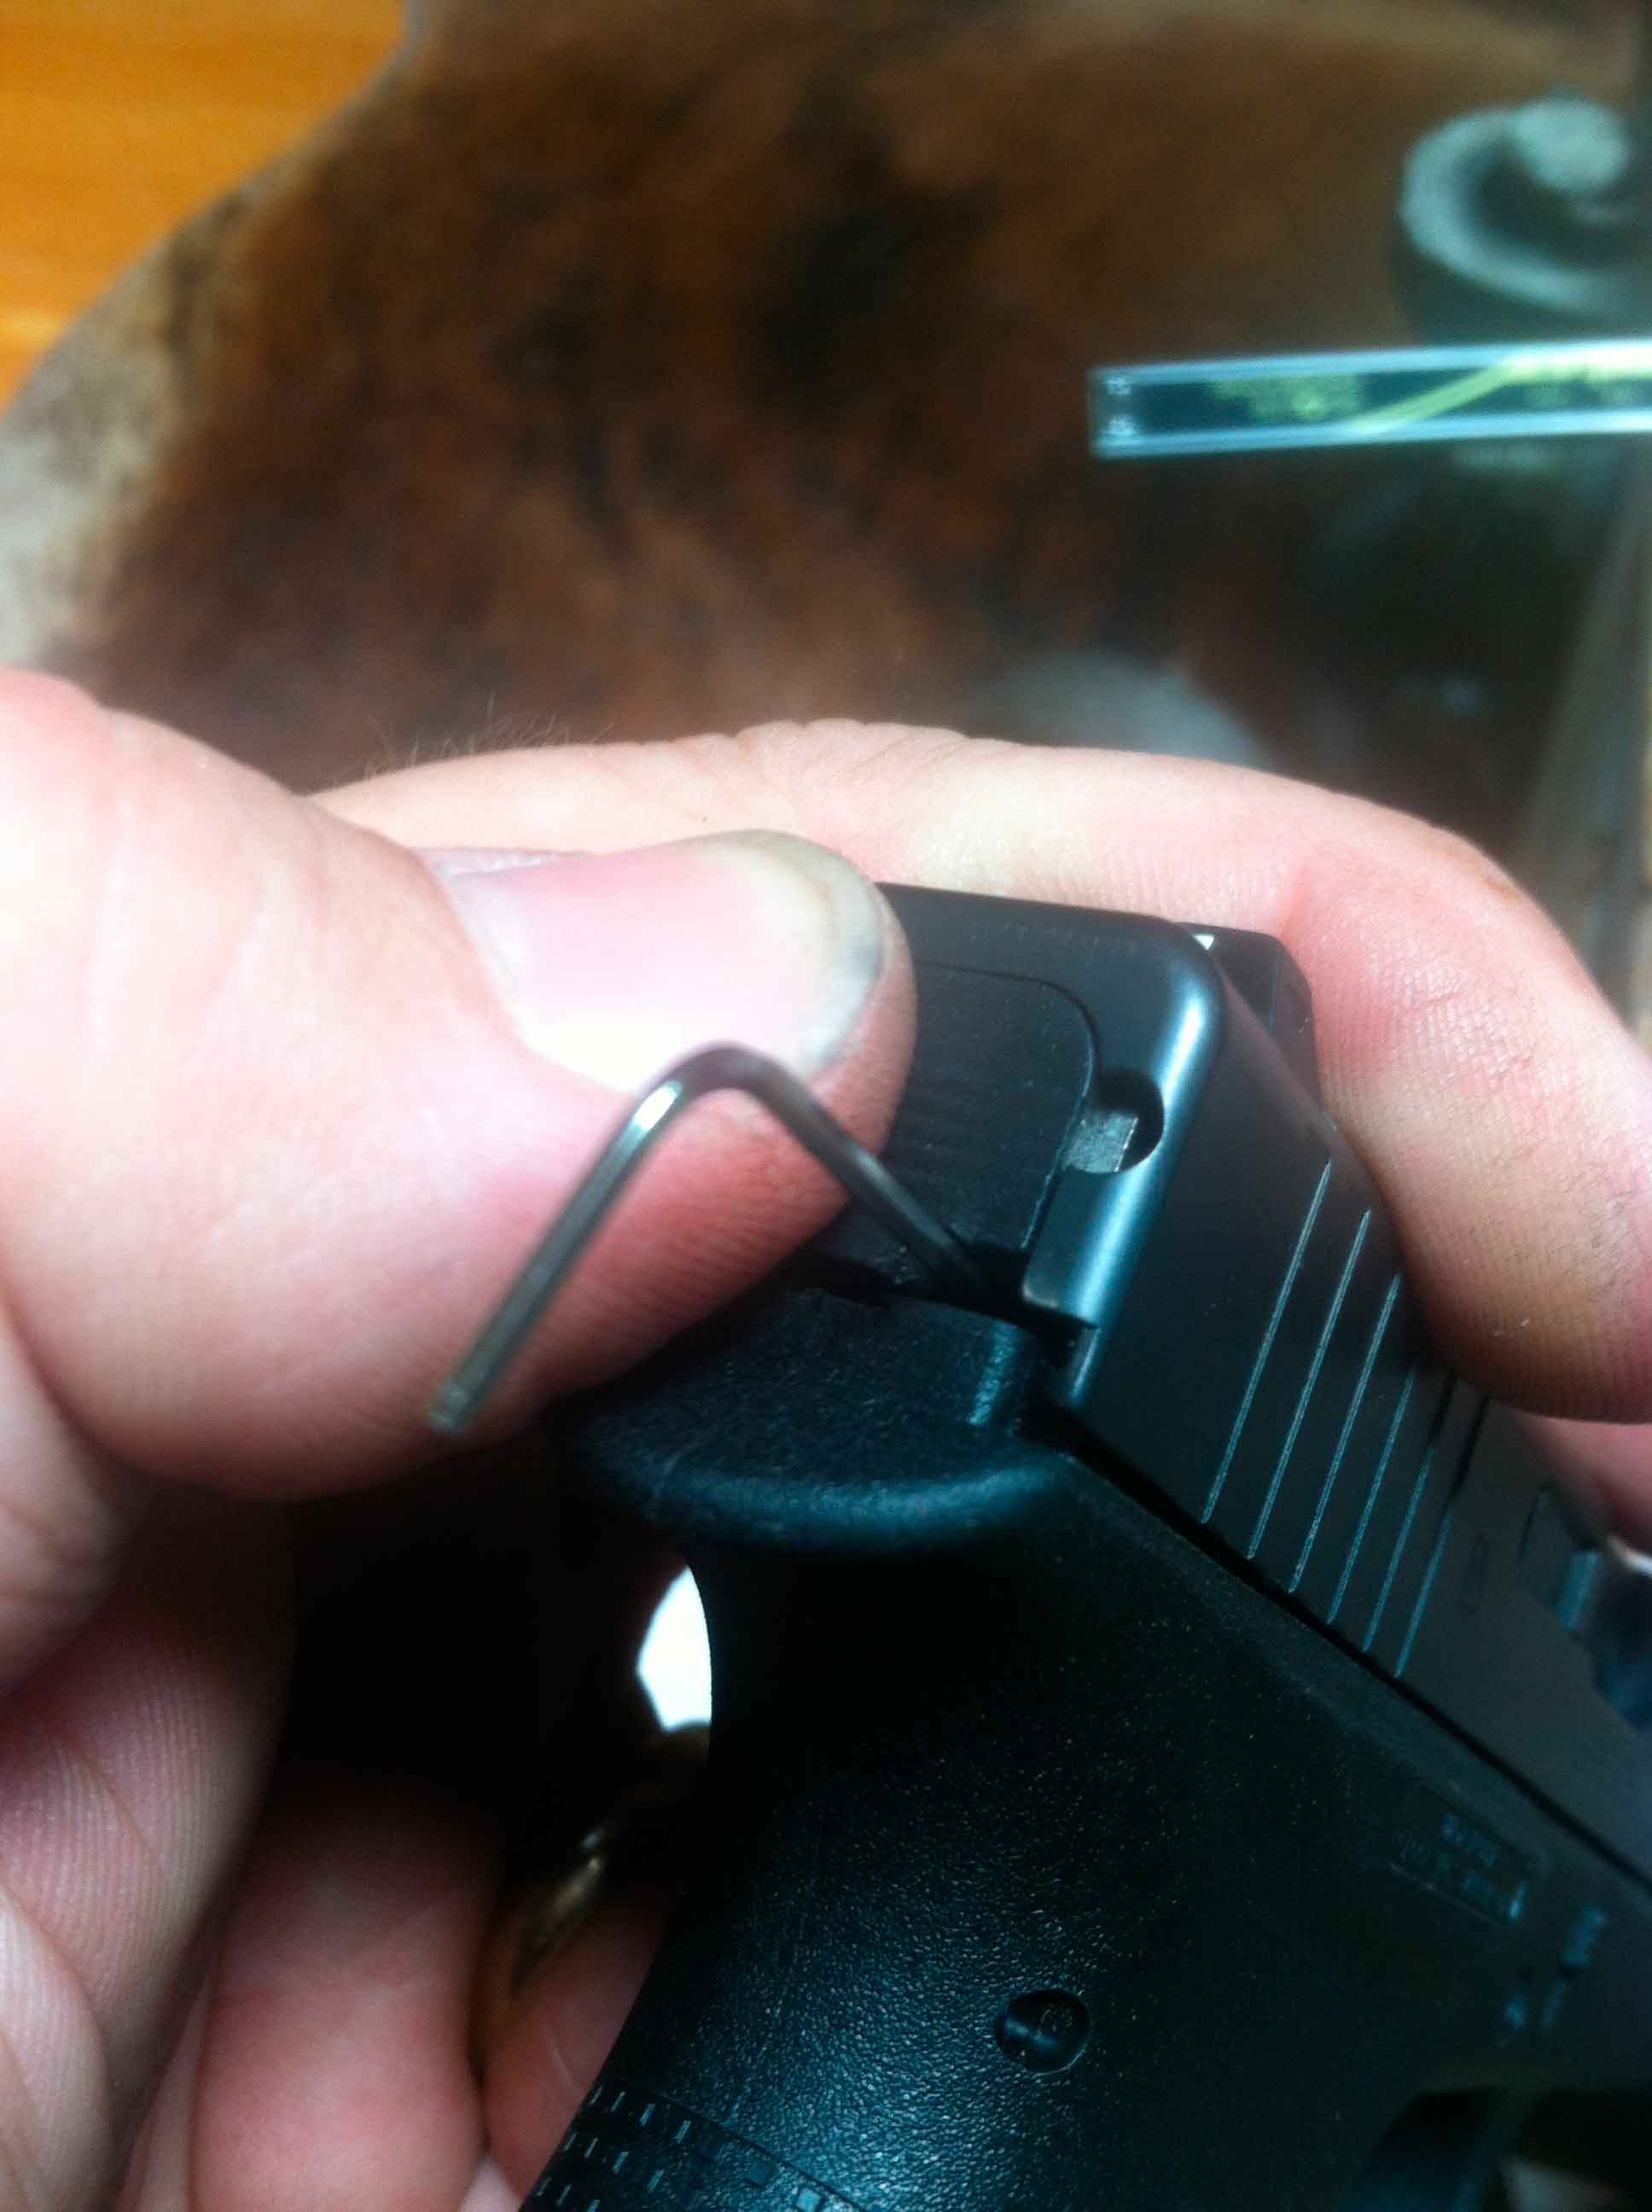 Glocks are incredibly well designed machines. 